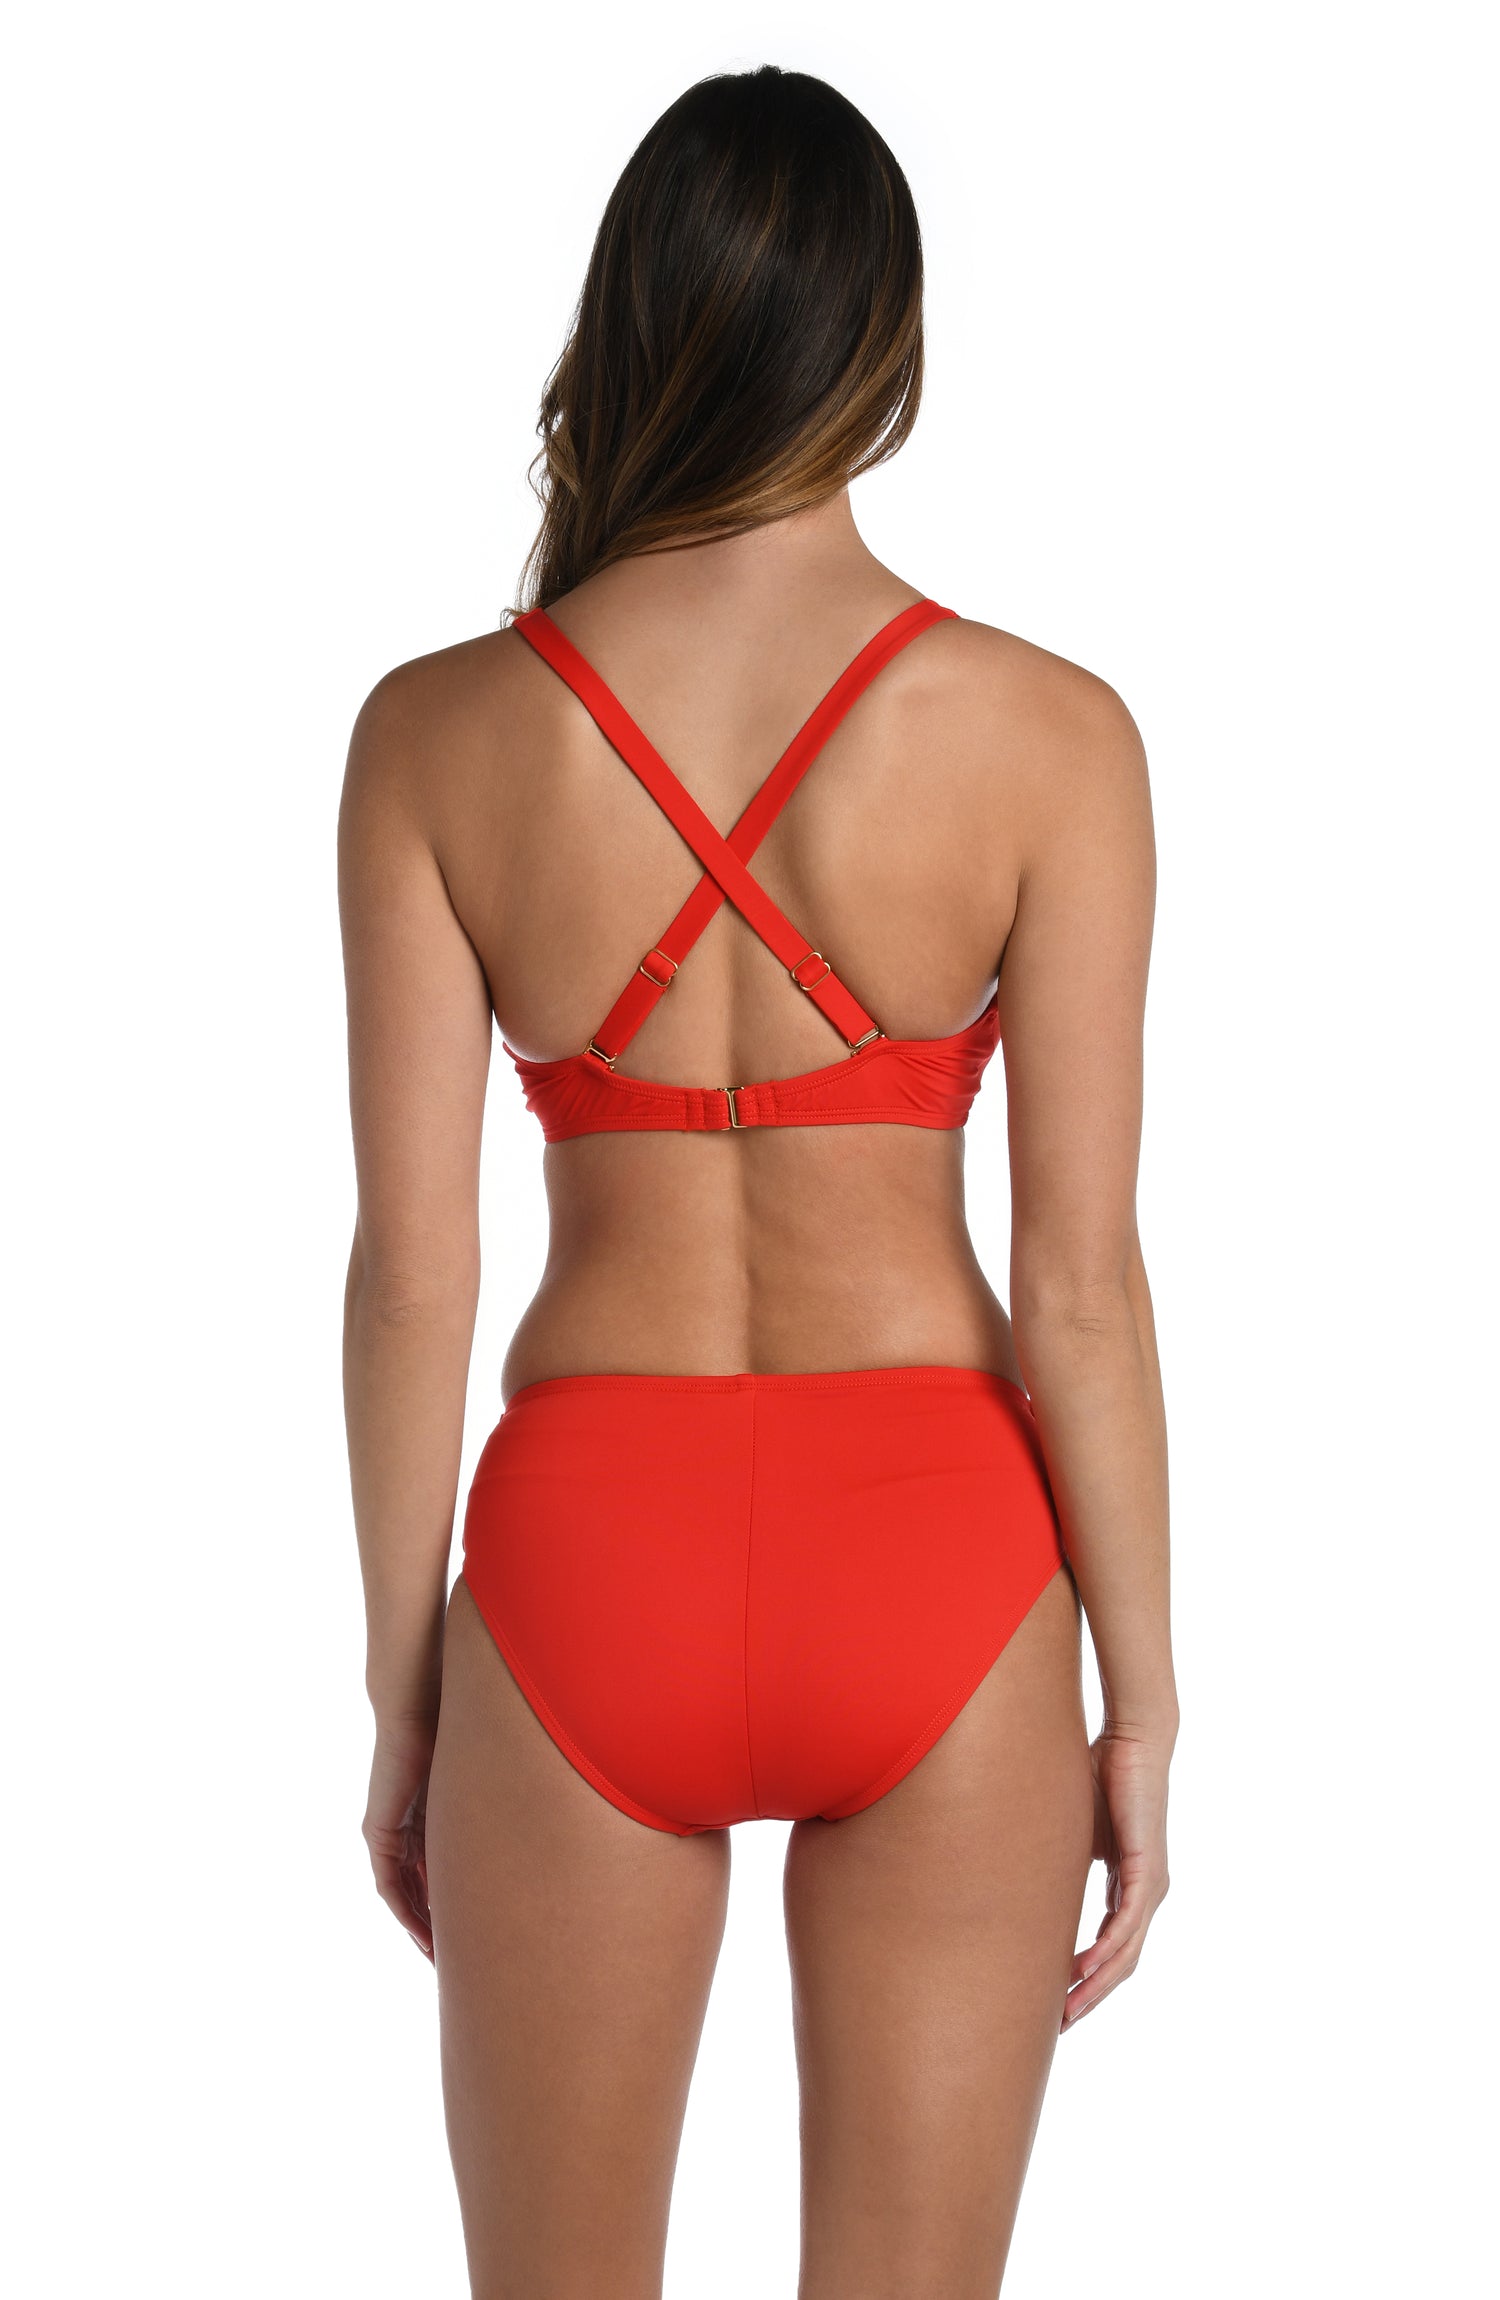 Model is wearing a cherry colored underwire swimsuit top from our Best-Selling Island Goddess collection.